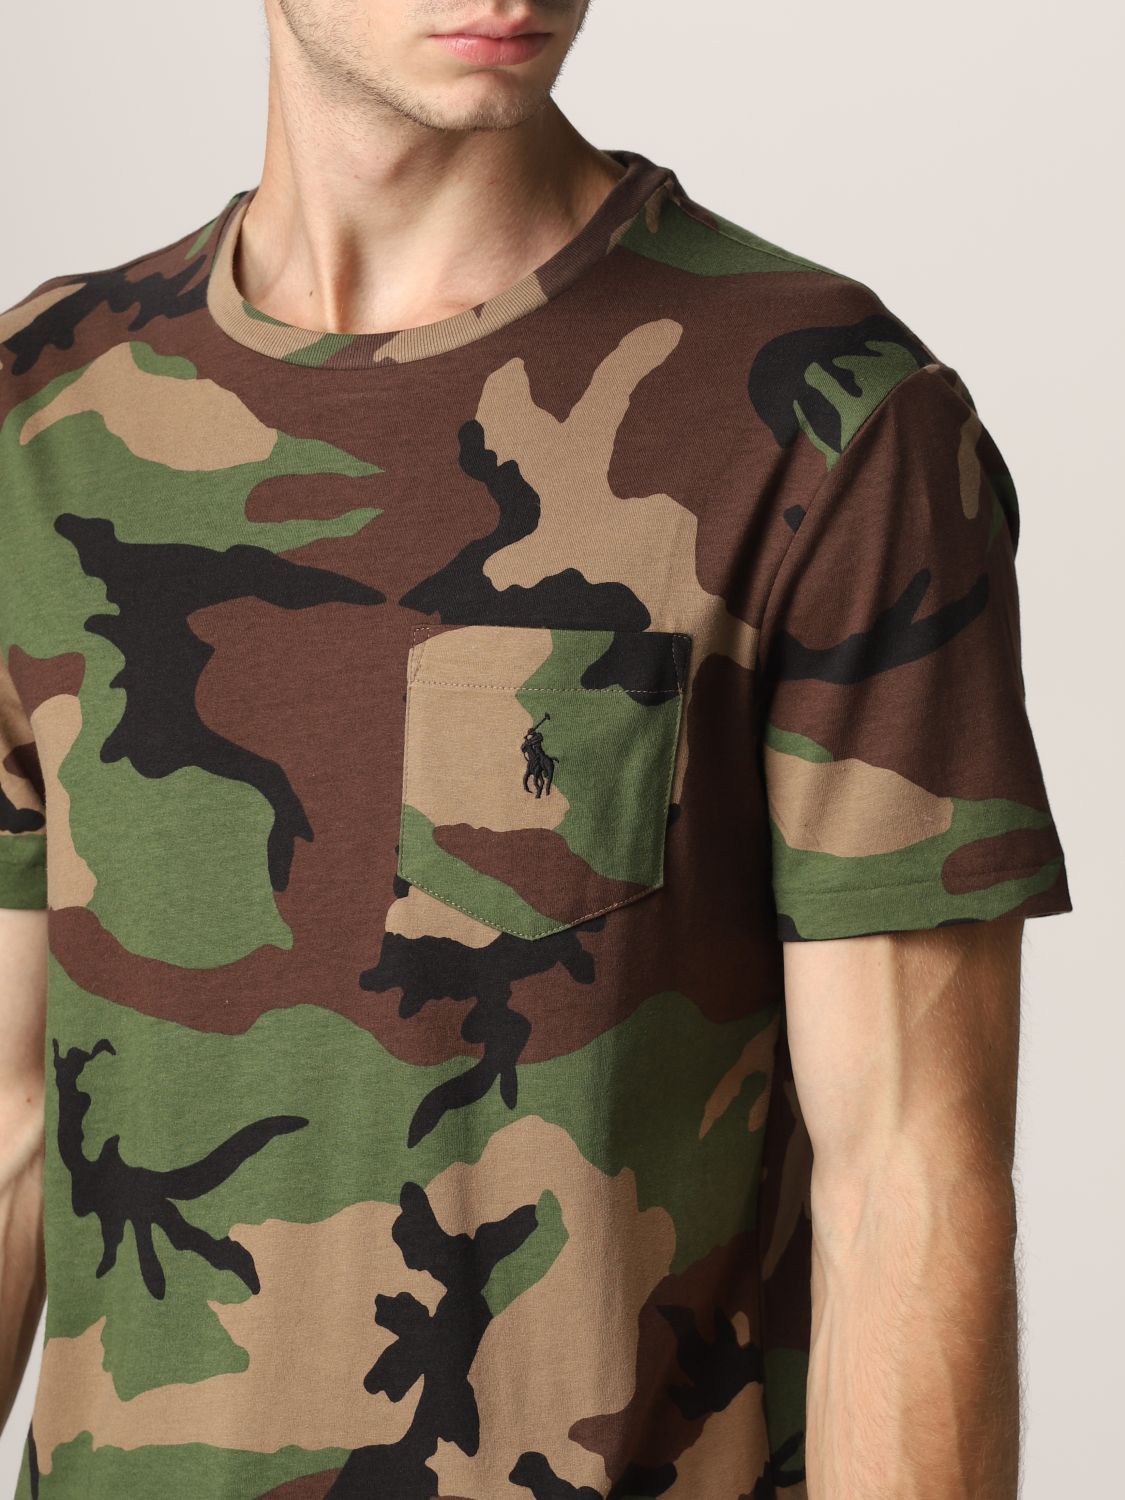 POLO RALPH LAUREN: t-shirt in camouflage cotton - Military | Polo Ralph  Lauren t-shirt 710812948 online on 